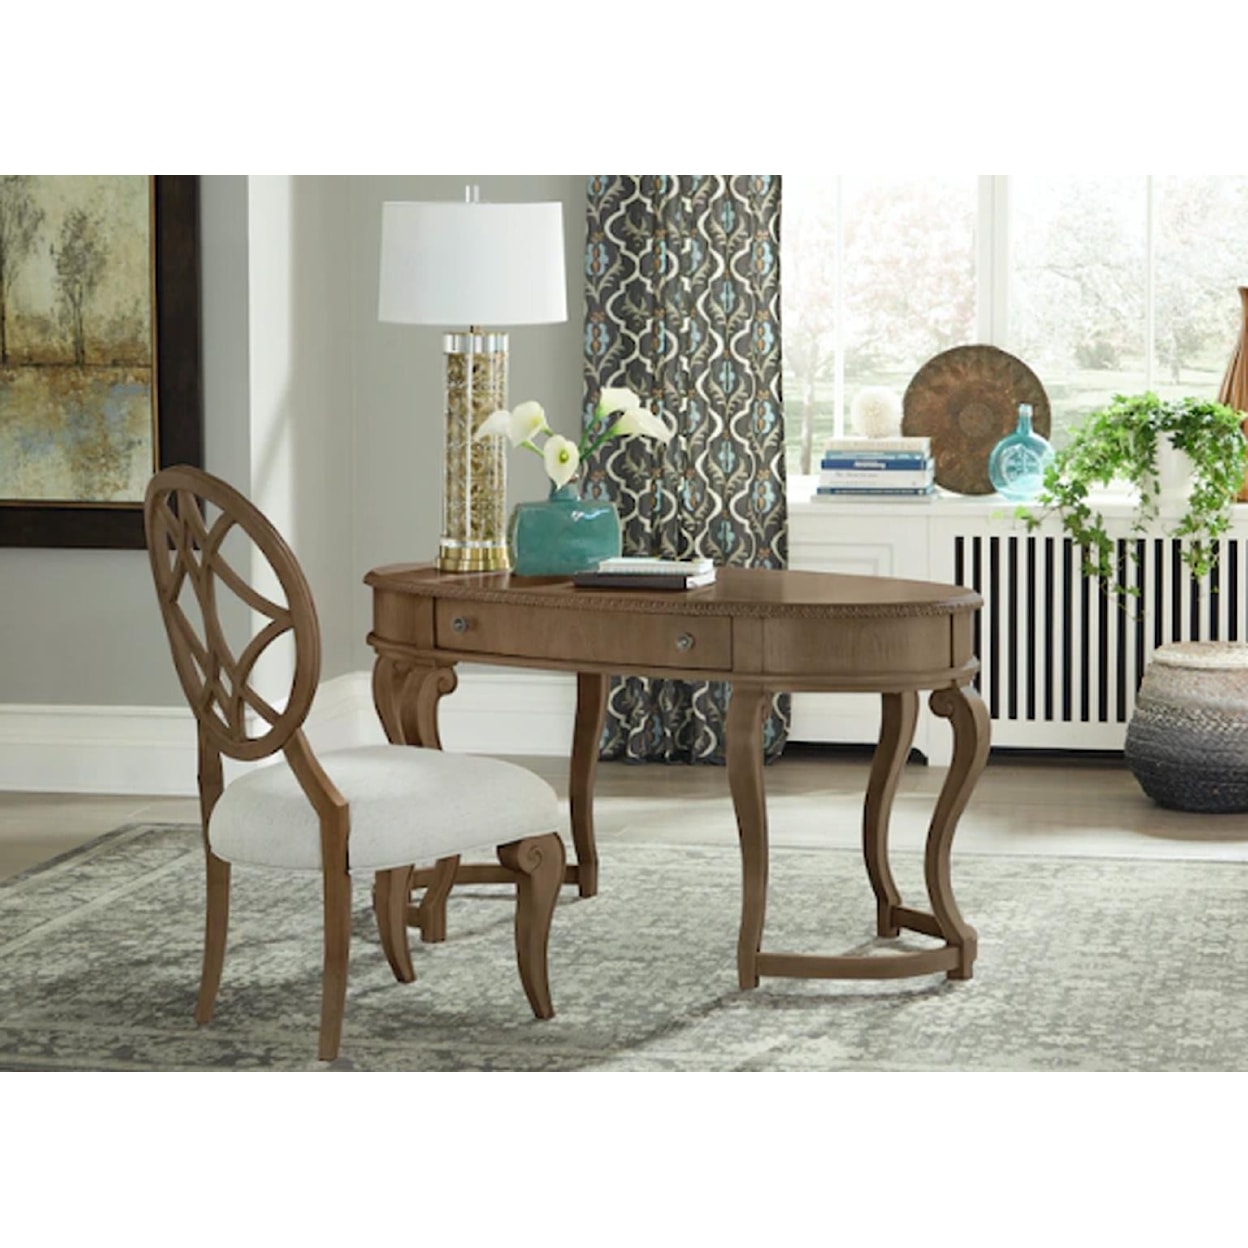 Trisha Yearwood Home Collection by Legacy Classic Jasper County Desk